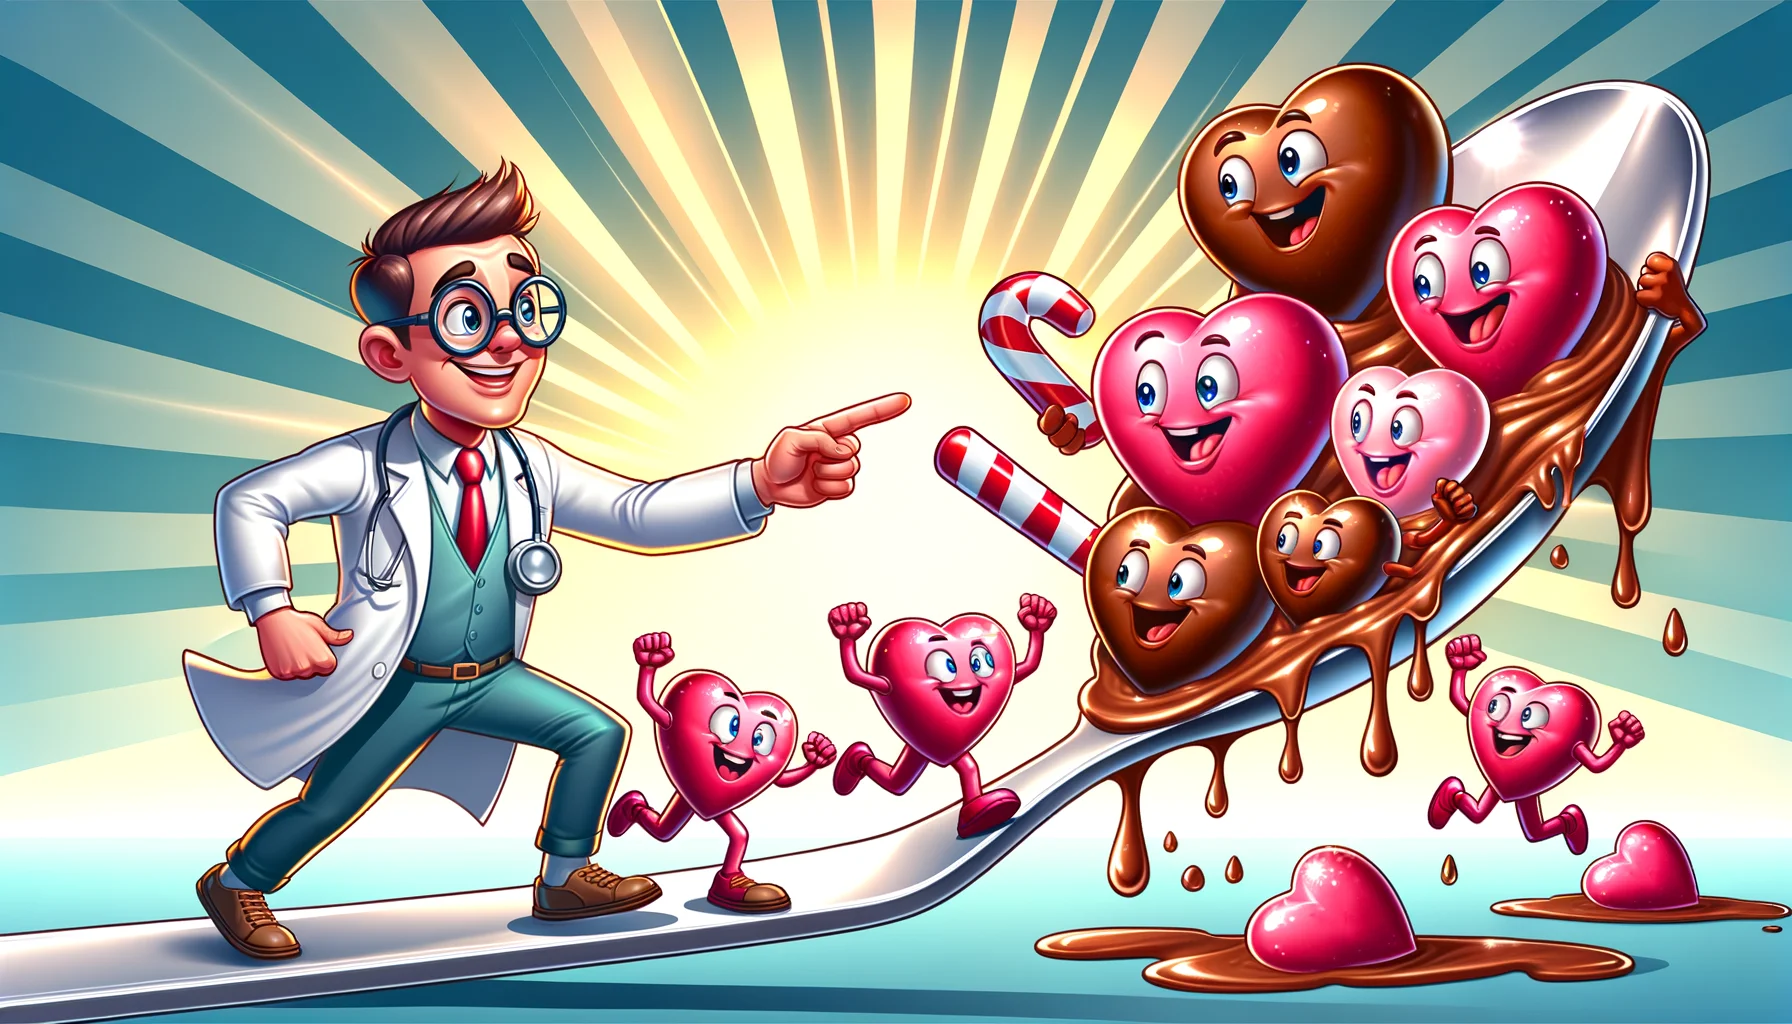 Design a comical yet realistic image that showcases 'Low-Sodium Sweets for Heart Health' as being the most ideal option. Capture the scene of a diverse group of melted heart-shaped chocolates playfully competing in a race on a giant pinkish spoon, with an amiable, spectacled chocolate doctor endorsing their choice, pointing towards them with a candy cane. Extra sunbeams radiating to emphasize the idea of perfection. Each part of the scene, including the background, characters, and objects, should be detailed and clearly visible.